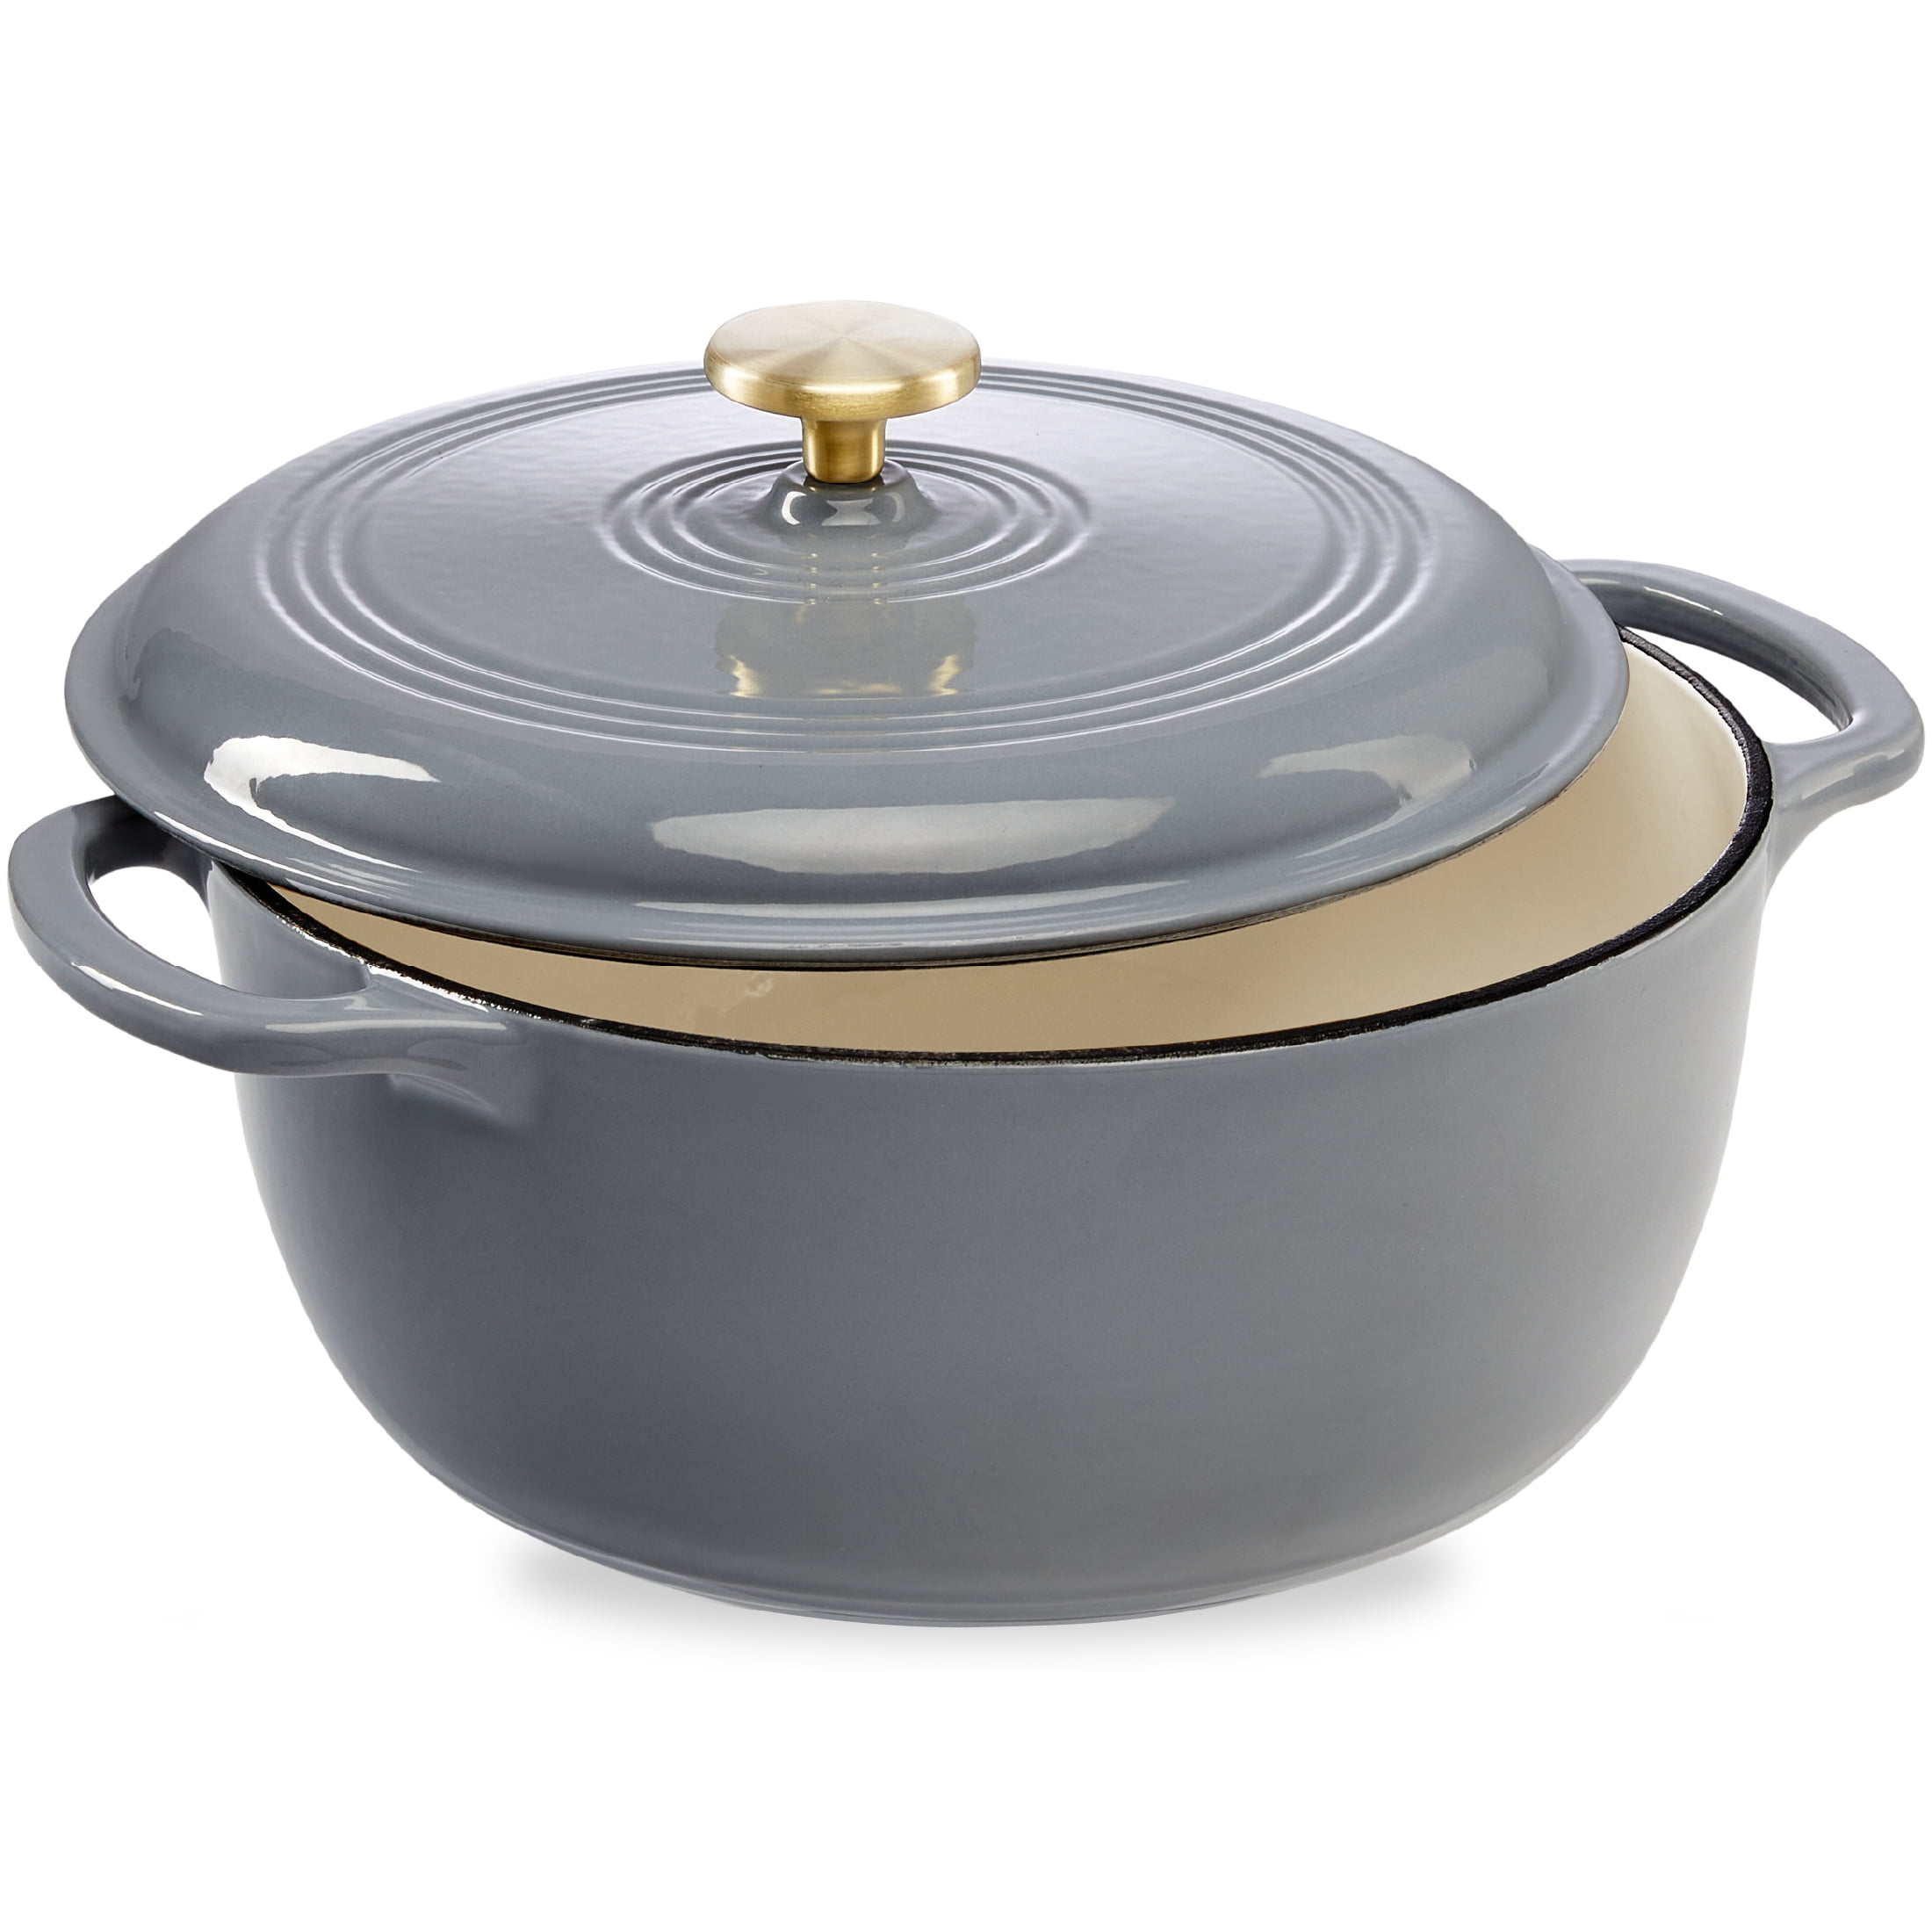 KOOC 10-in-1 Electric Dutch Oven, 6-Quart White, Slow Cook, Braise, Meat  Stew, Sear/Sauté, Enameled Cast Iron with Self-Basting Lid, 1500W in 2023